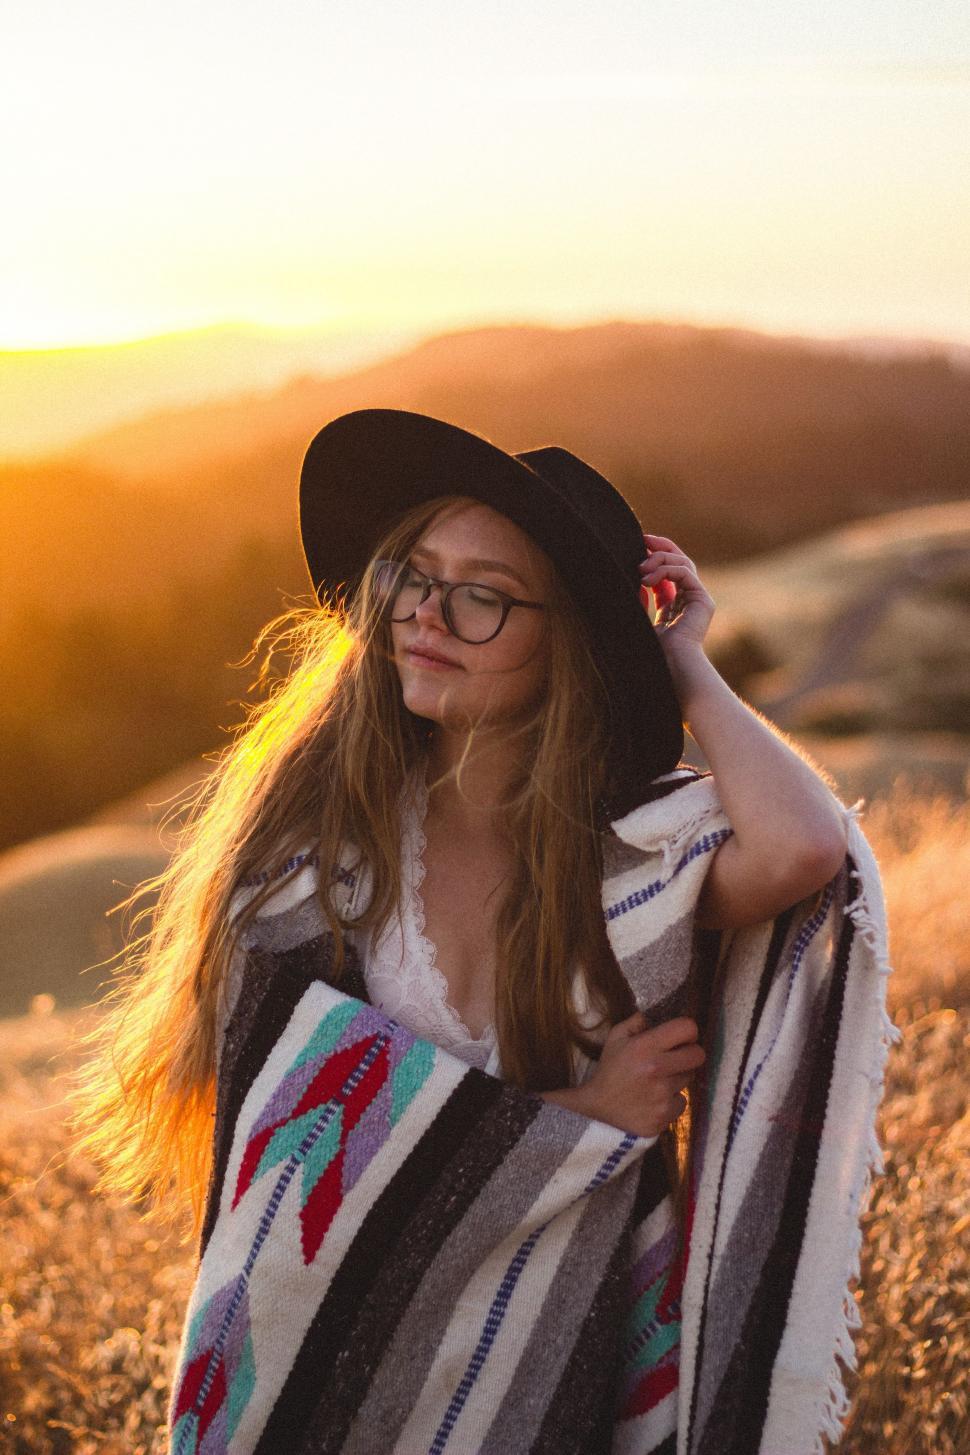 Free Image of Woman Wearing Hat and Blanket in Field 